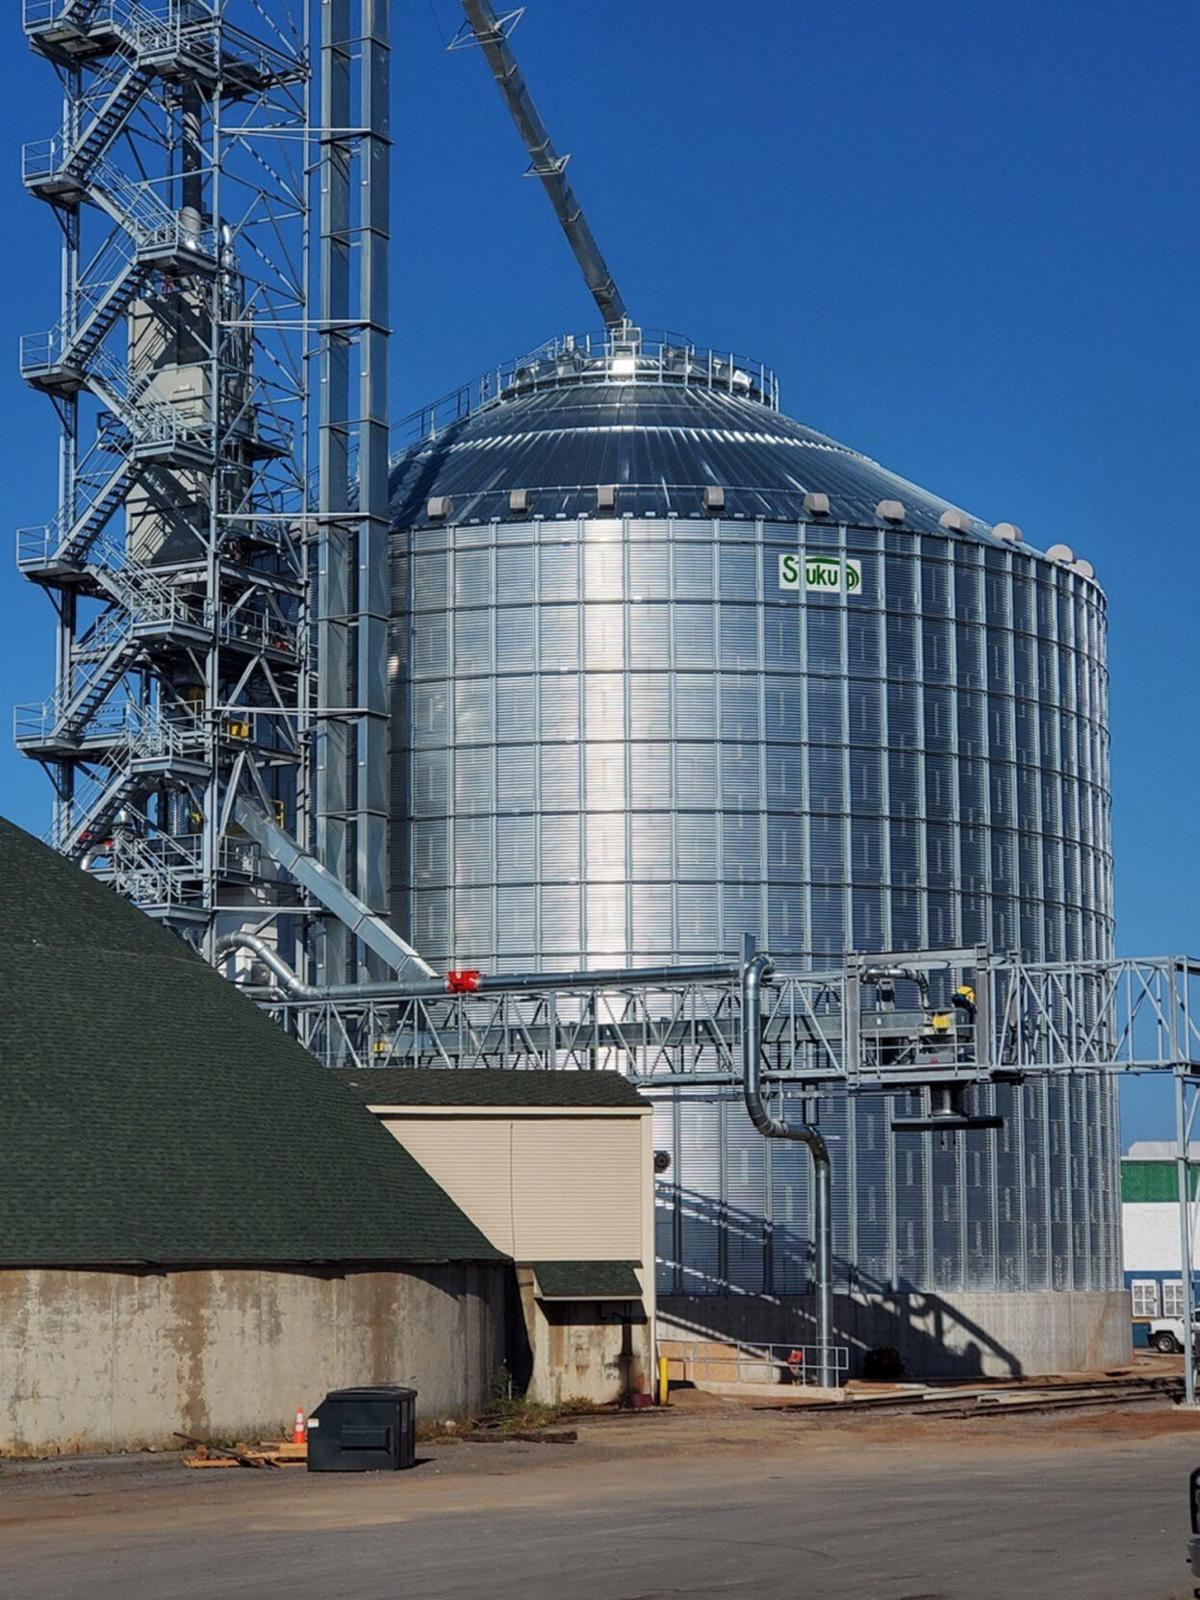 Port of Oswego opens grain export center dramatically cuts carbon footprint, greenhouse gas emissions